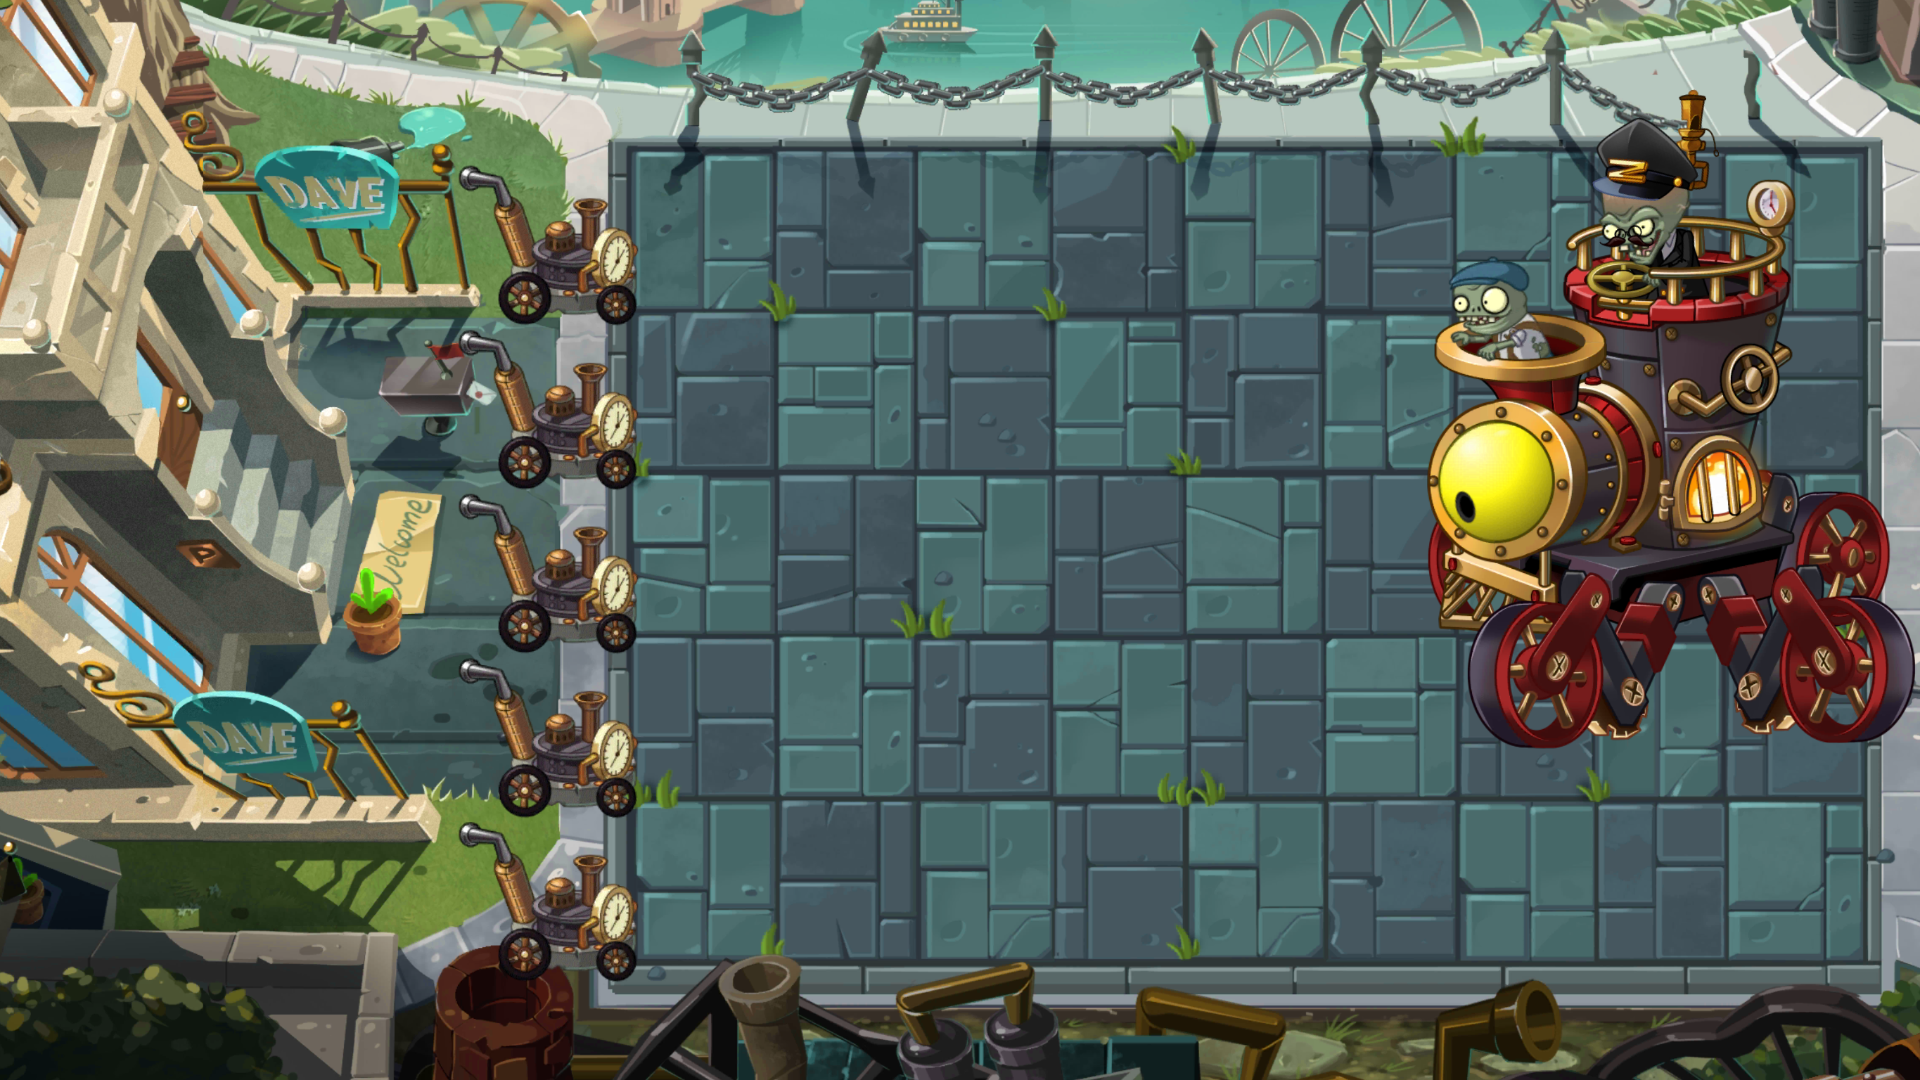 Steam Age - Day 1, Plants vs. Zombies Wiki